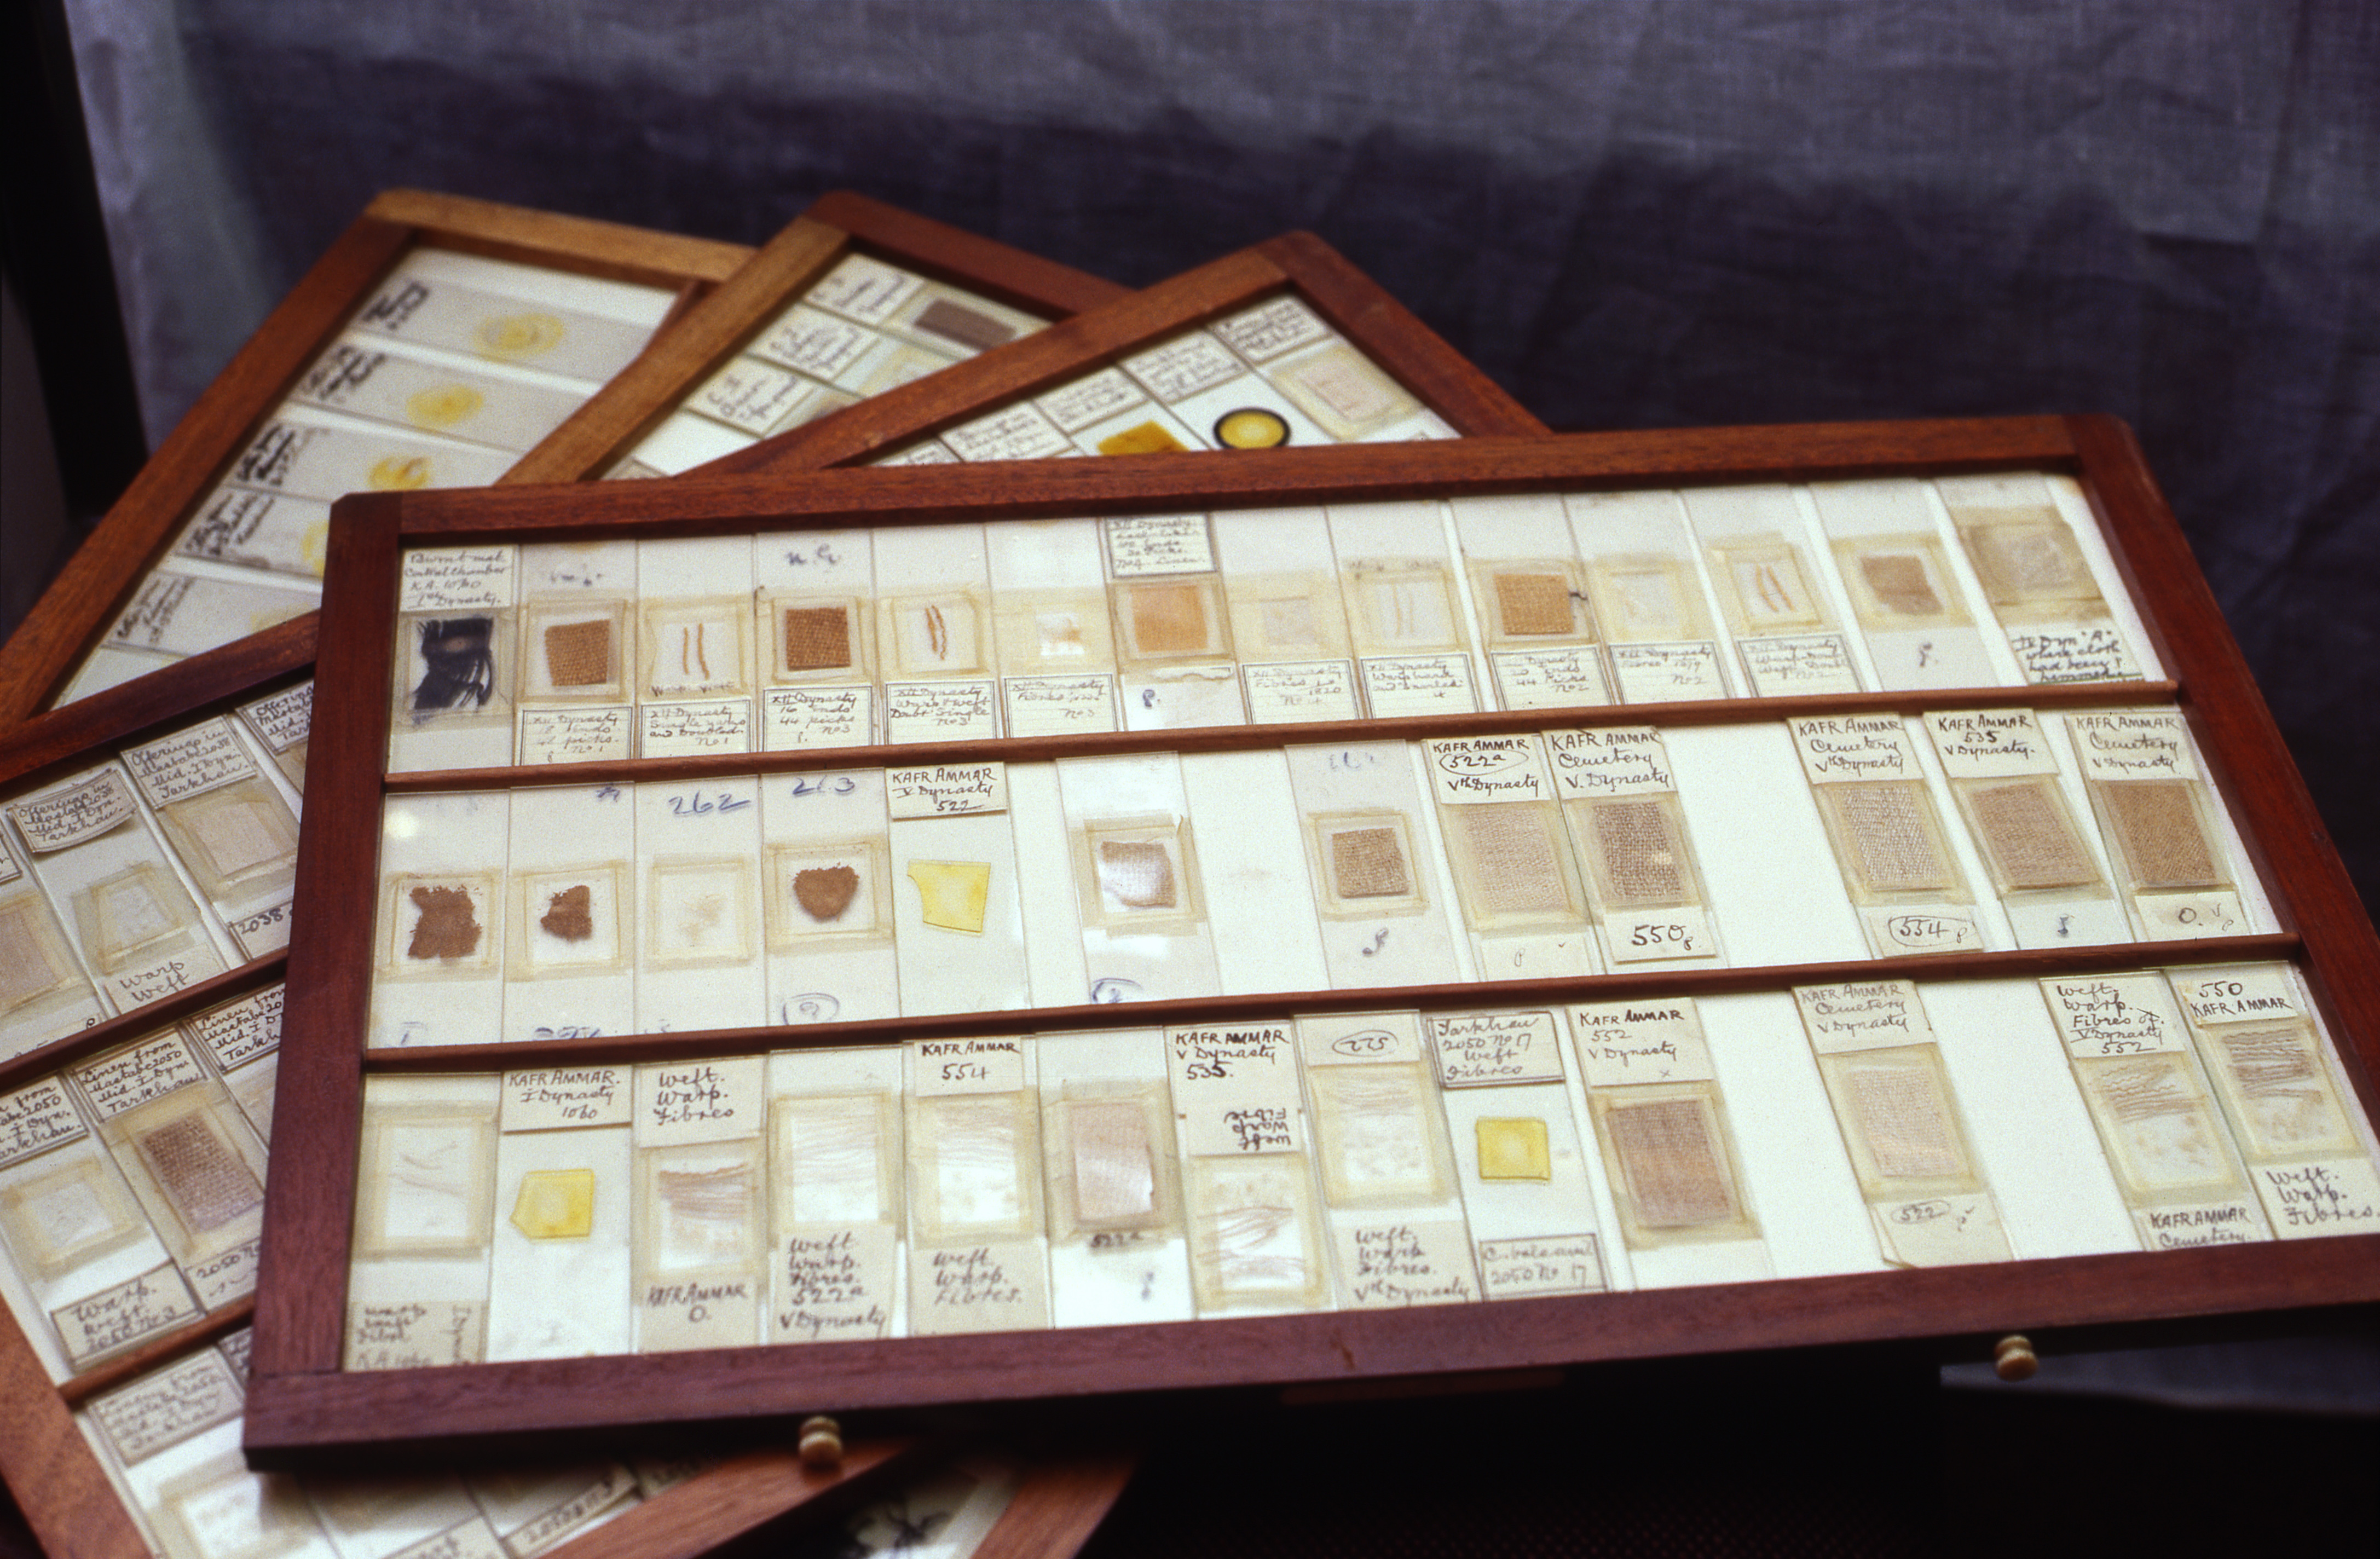 Image: Slide preparations for microscopy, early 19th century. Bolton Museum. Credit: Ron Oldfield